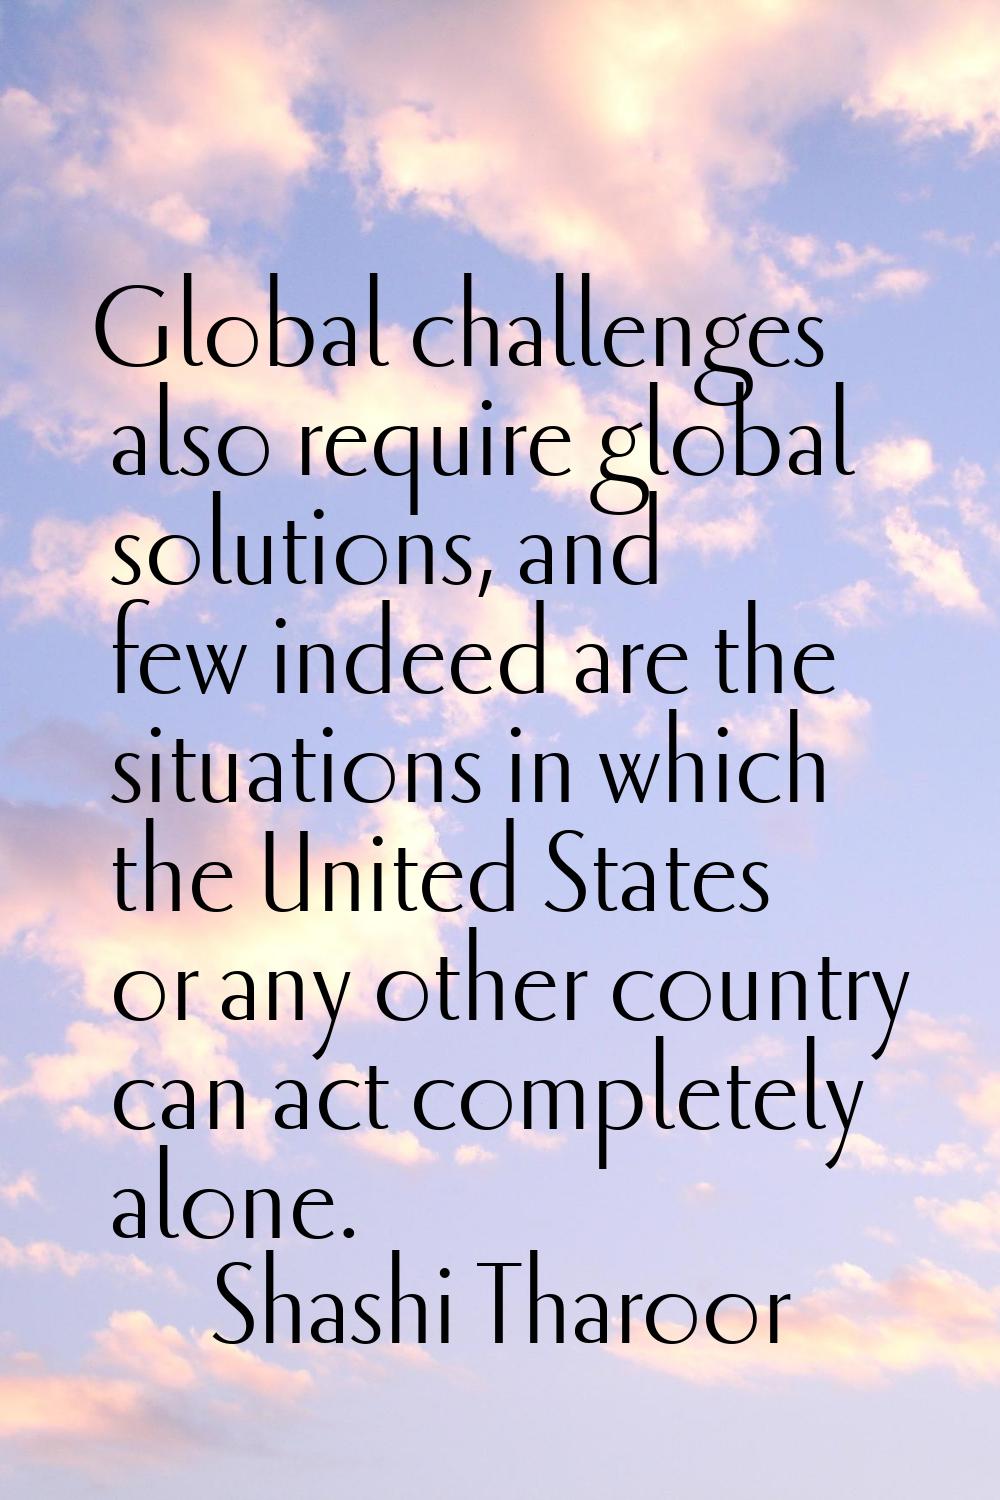 Global challenges also require global solutions, and few indeed are the situations in which the Uni